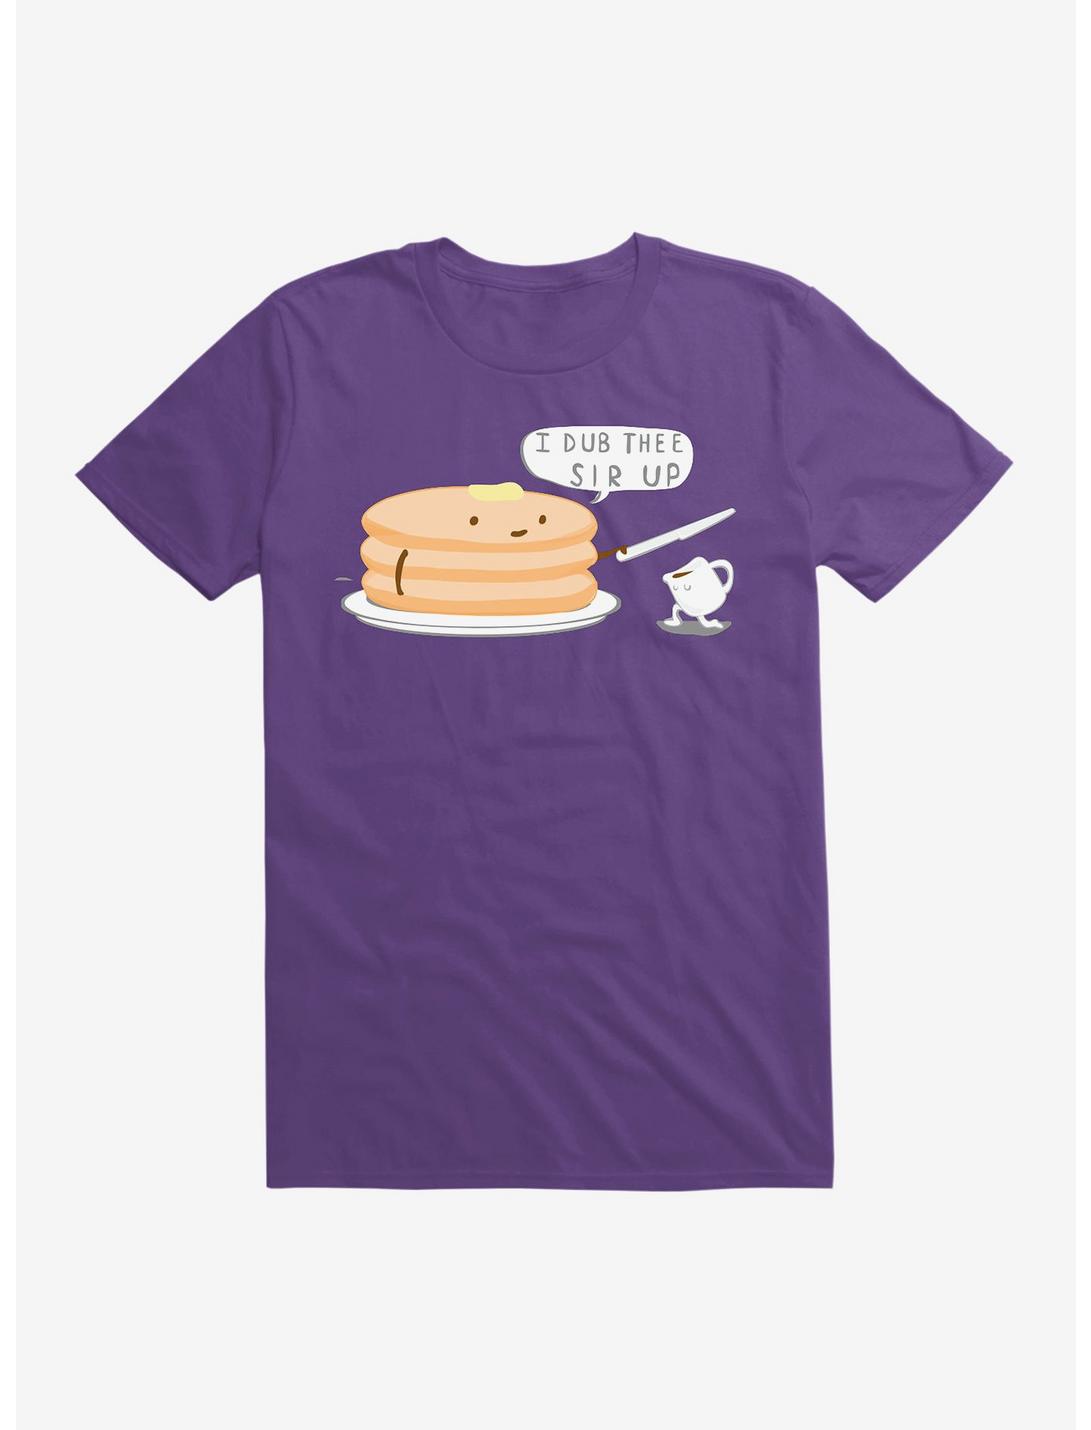 Knight Of The Breakfast Table! T-Shirt, PURPLE, hi-res